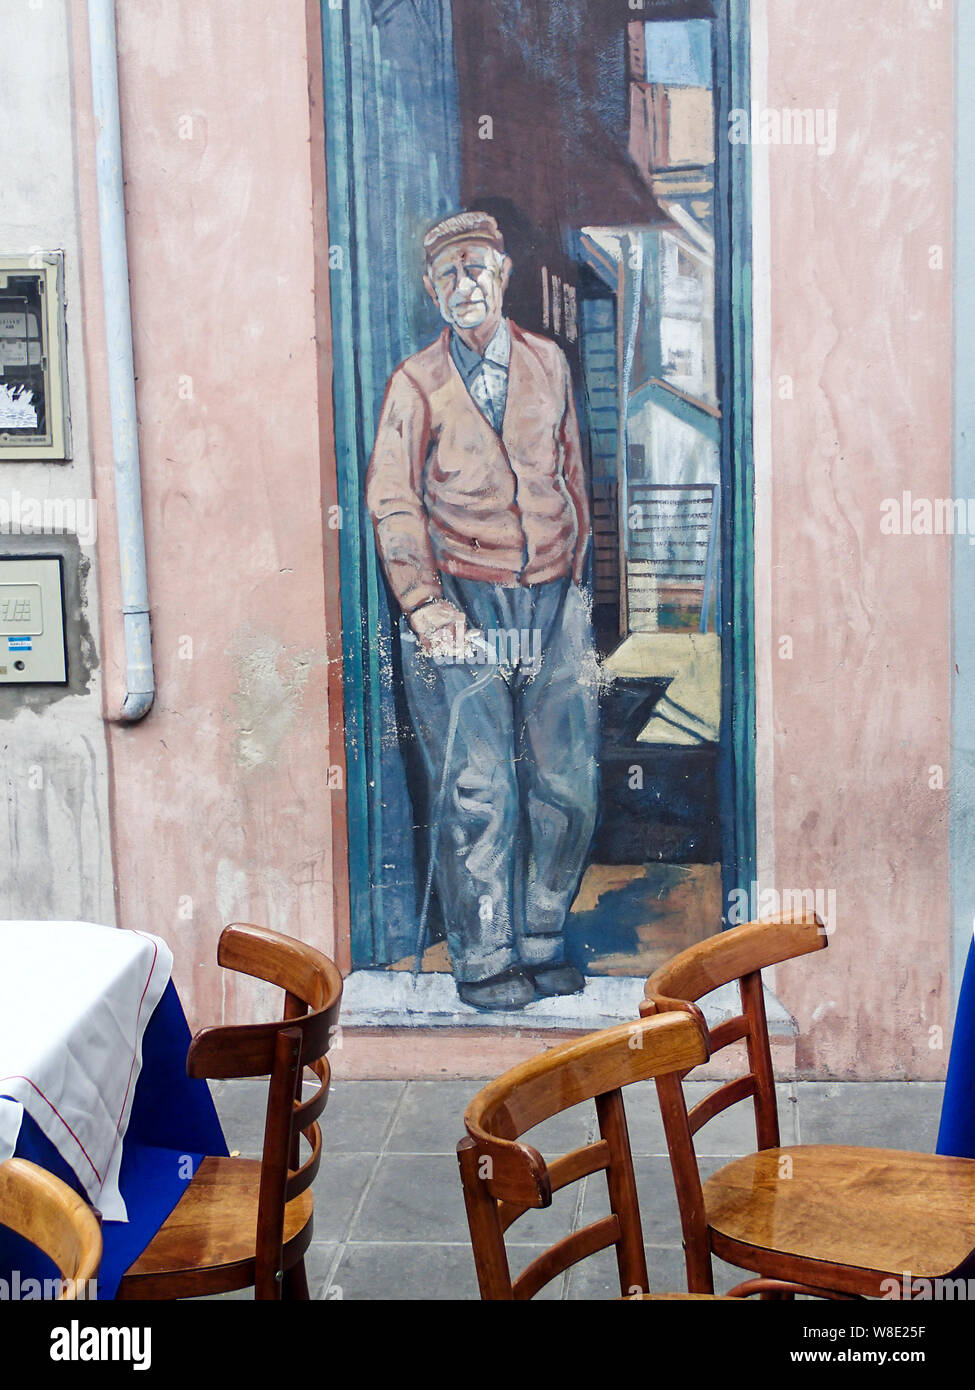 Buenos Aires, Argentina- March 4, 2013: wall murals in Buenos Aires with restaurant chairs in the foreground Stock Photo